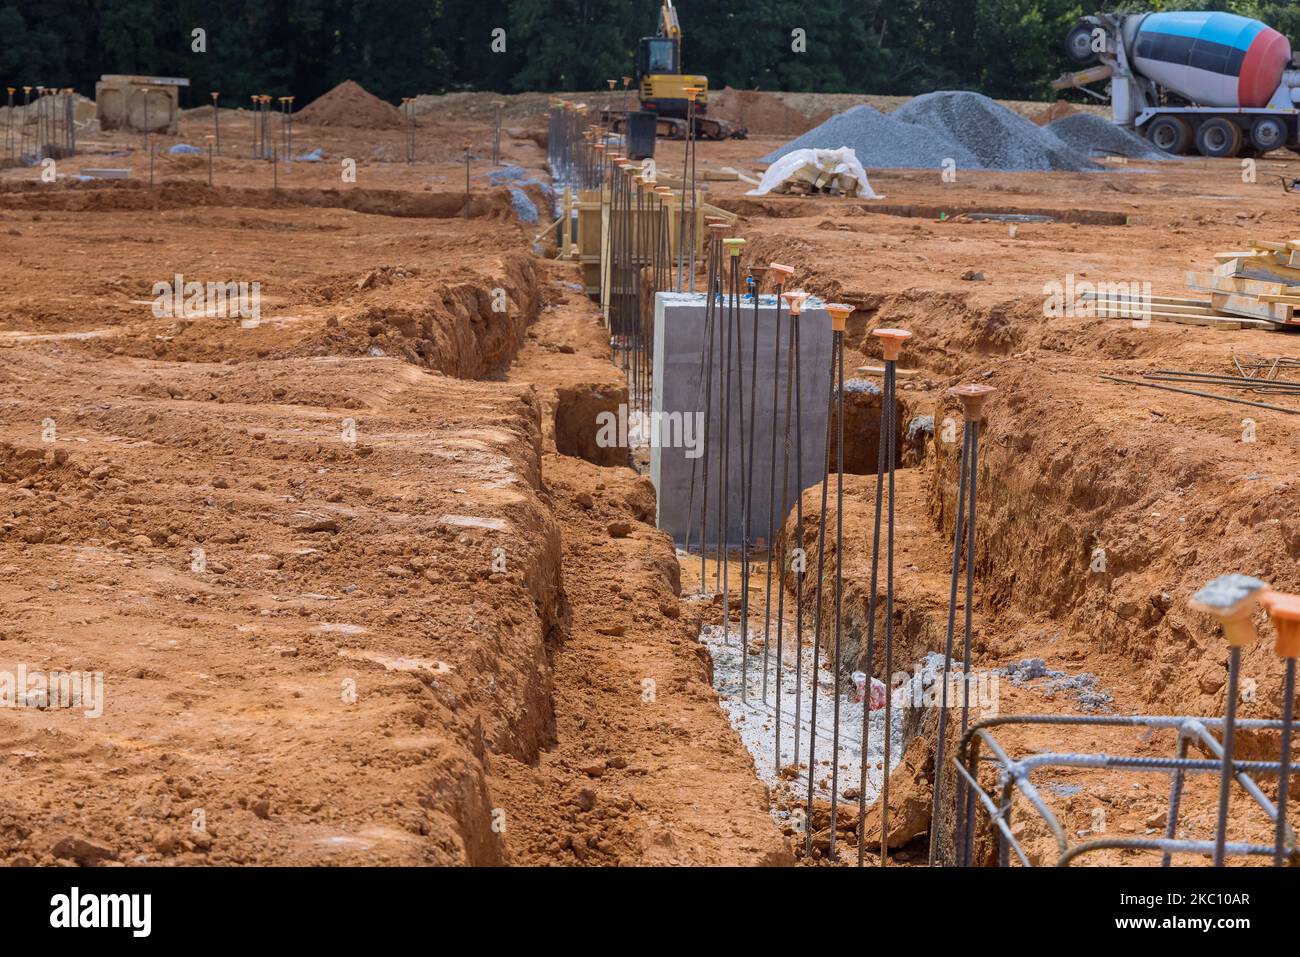 During construction reinforcement with steel bars rebar wires is being placed into trenches for purpose strengthening concrete foundation Stock Photo